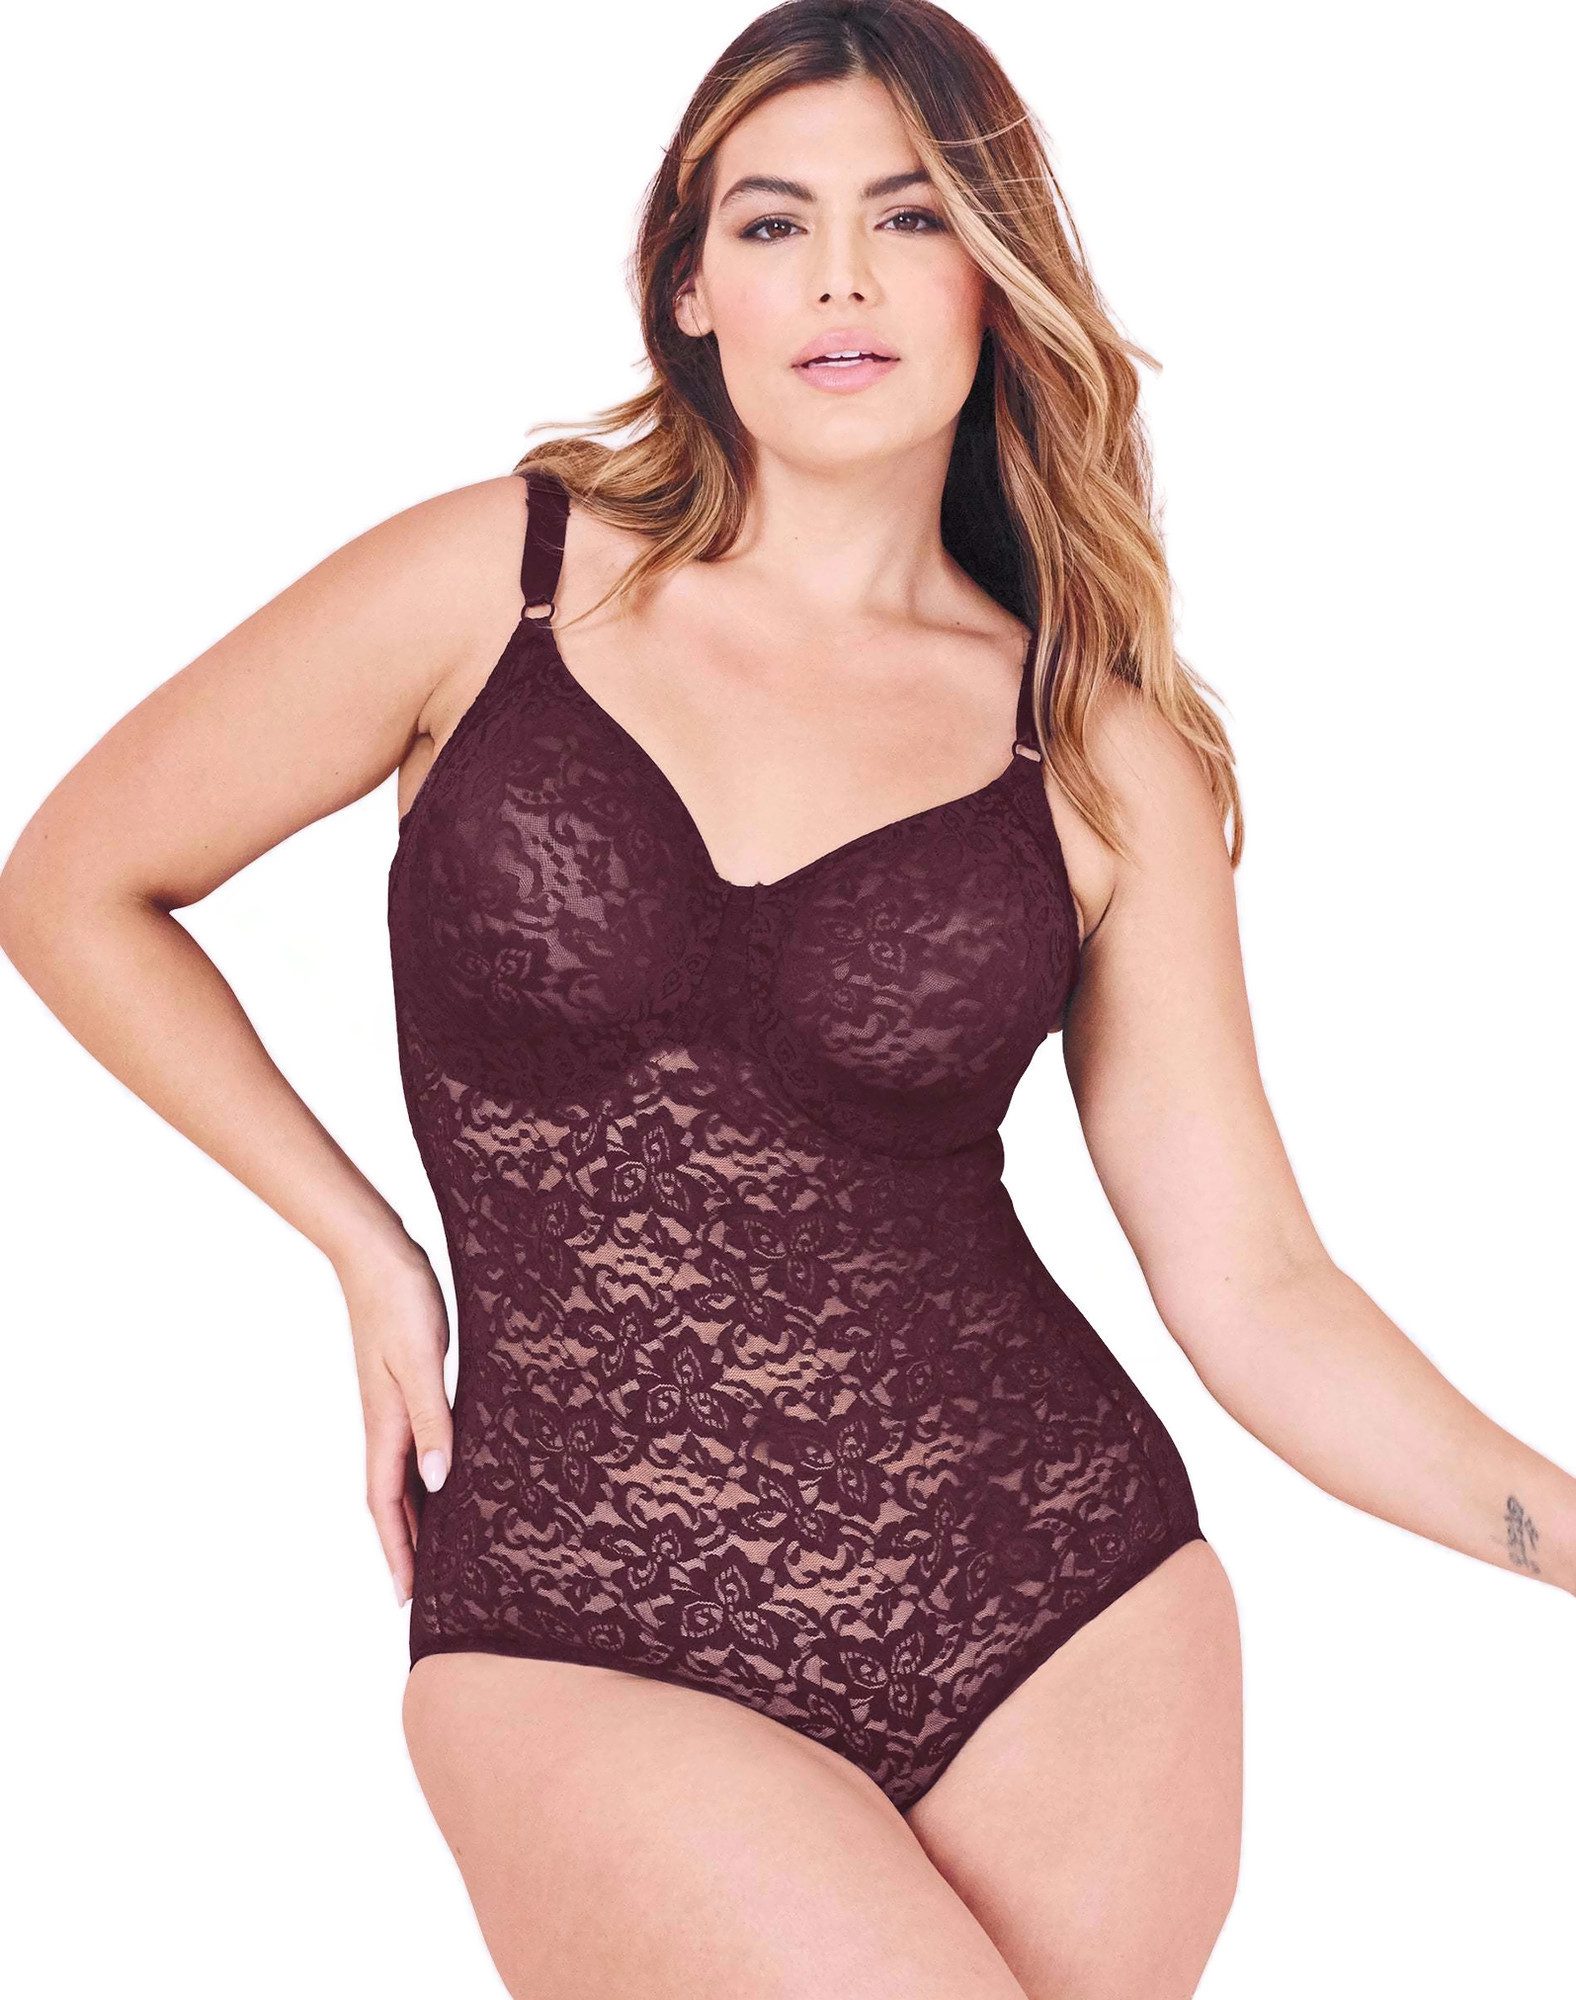 Lace 'N Smooth Firm Control Camisole